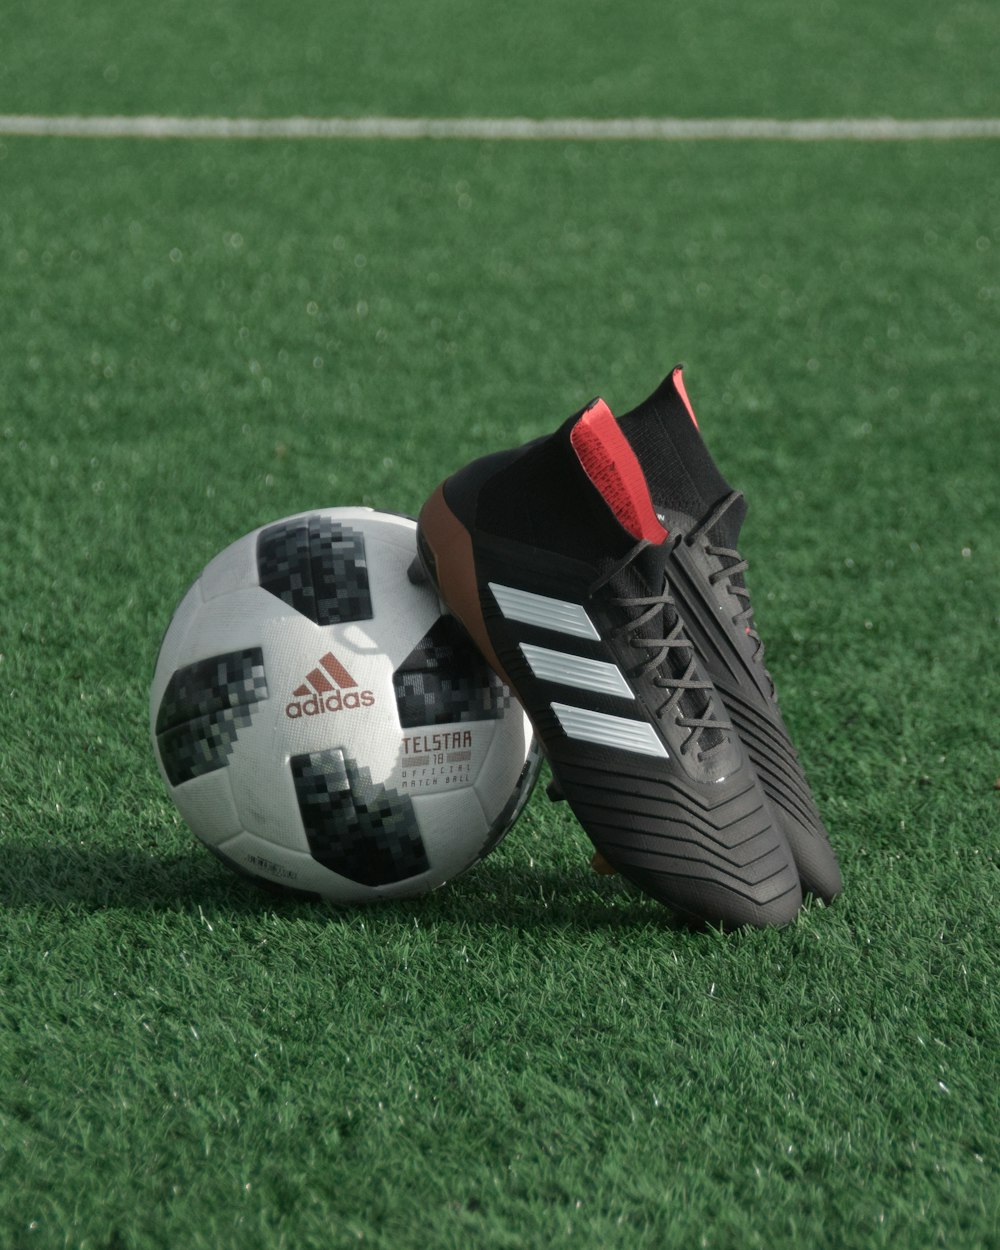 black adidas cleats lean on white and black adidas soccer ball on green  grass photo – Free Stripes Image on Unsplash